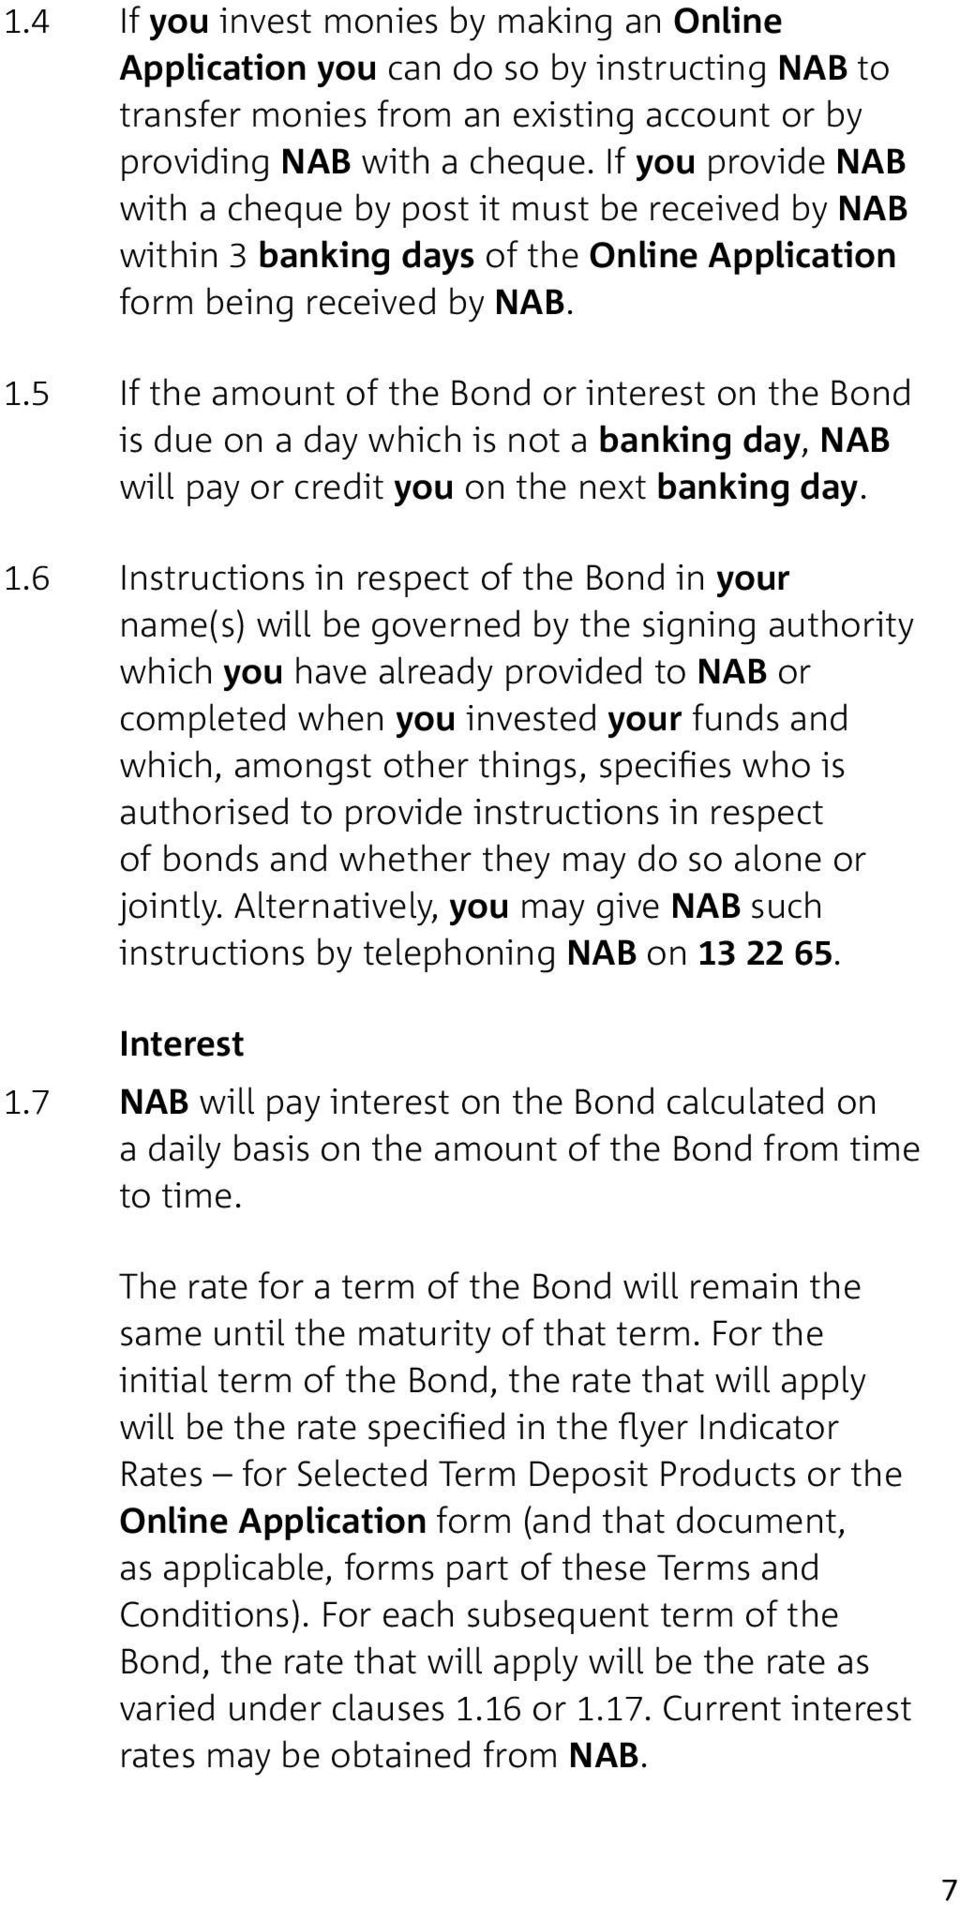 5 If the amount of the Bond or interest on the Bond is due on a day which is not a banking day, NAB will pay or credit you on the next banking day. 1.